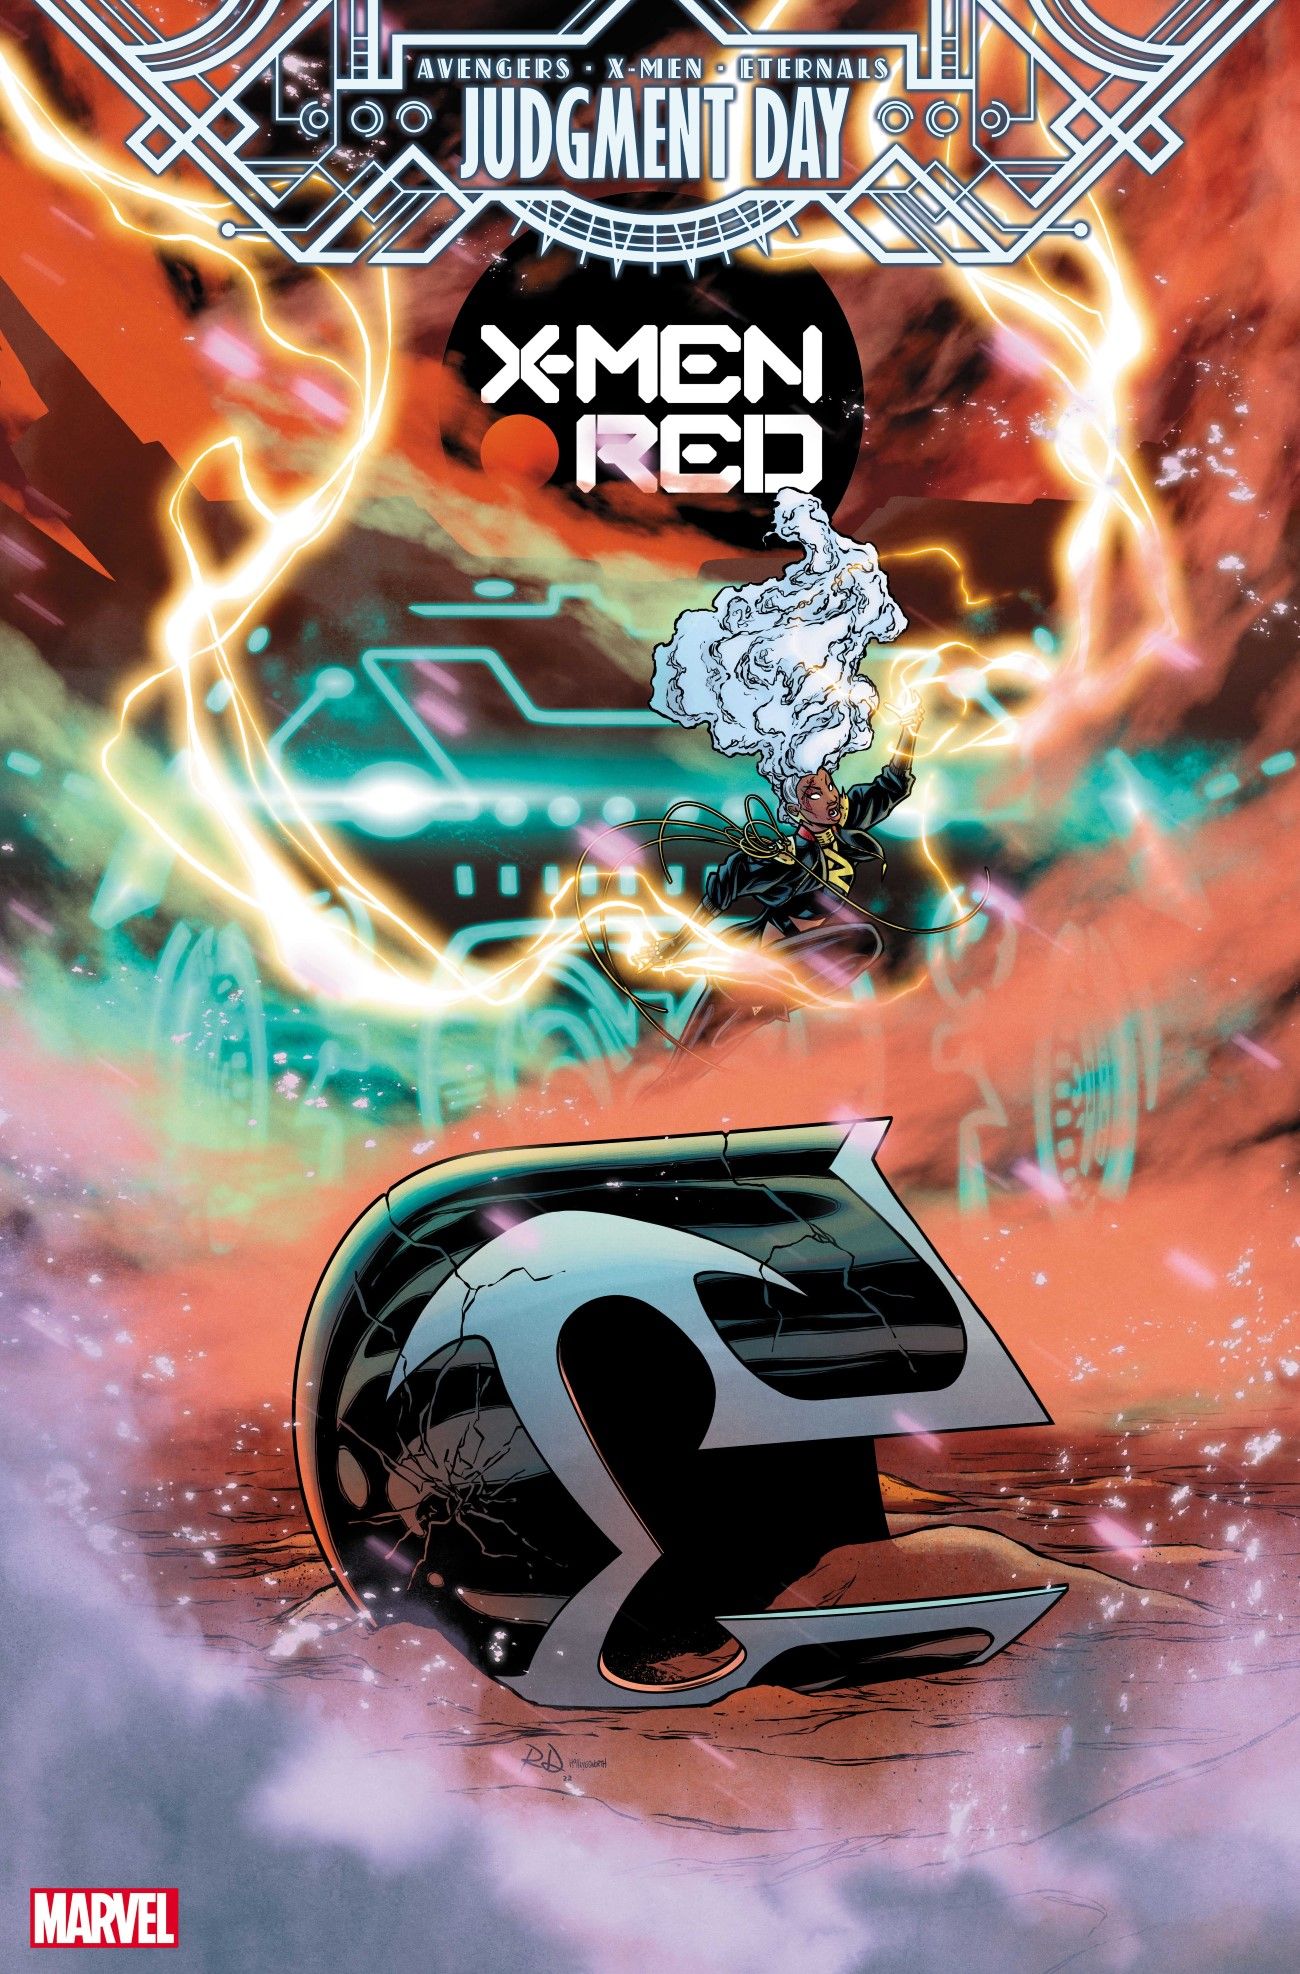 X-Men Red 6 AXE Judgment Day cover art.